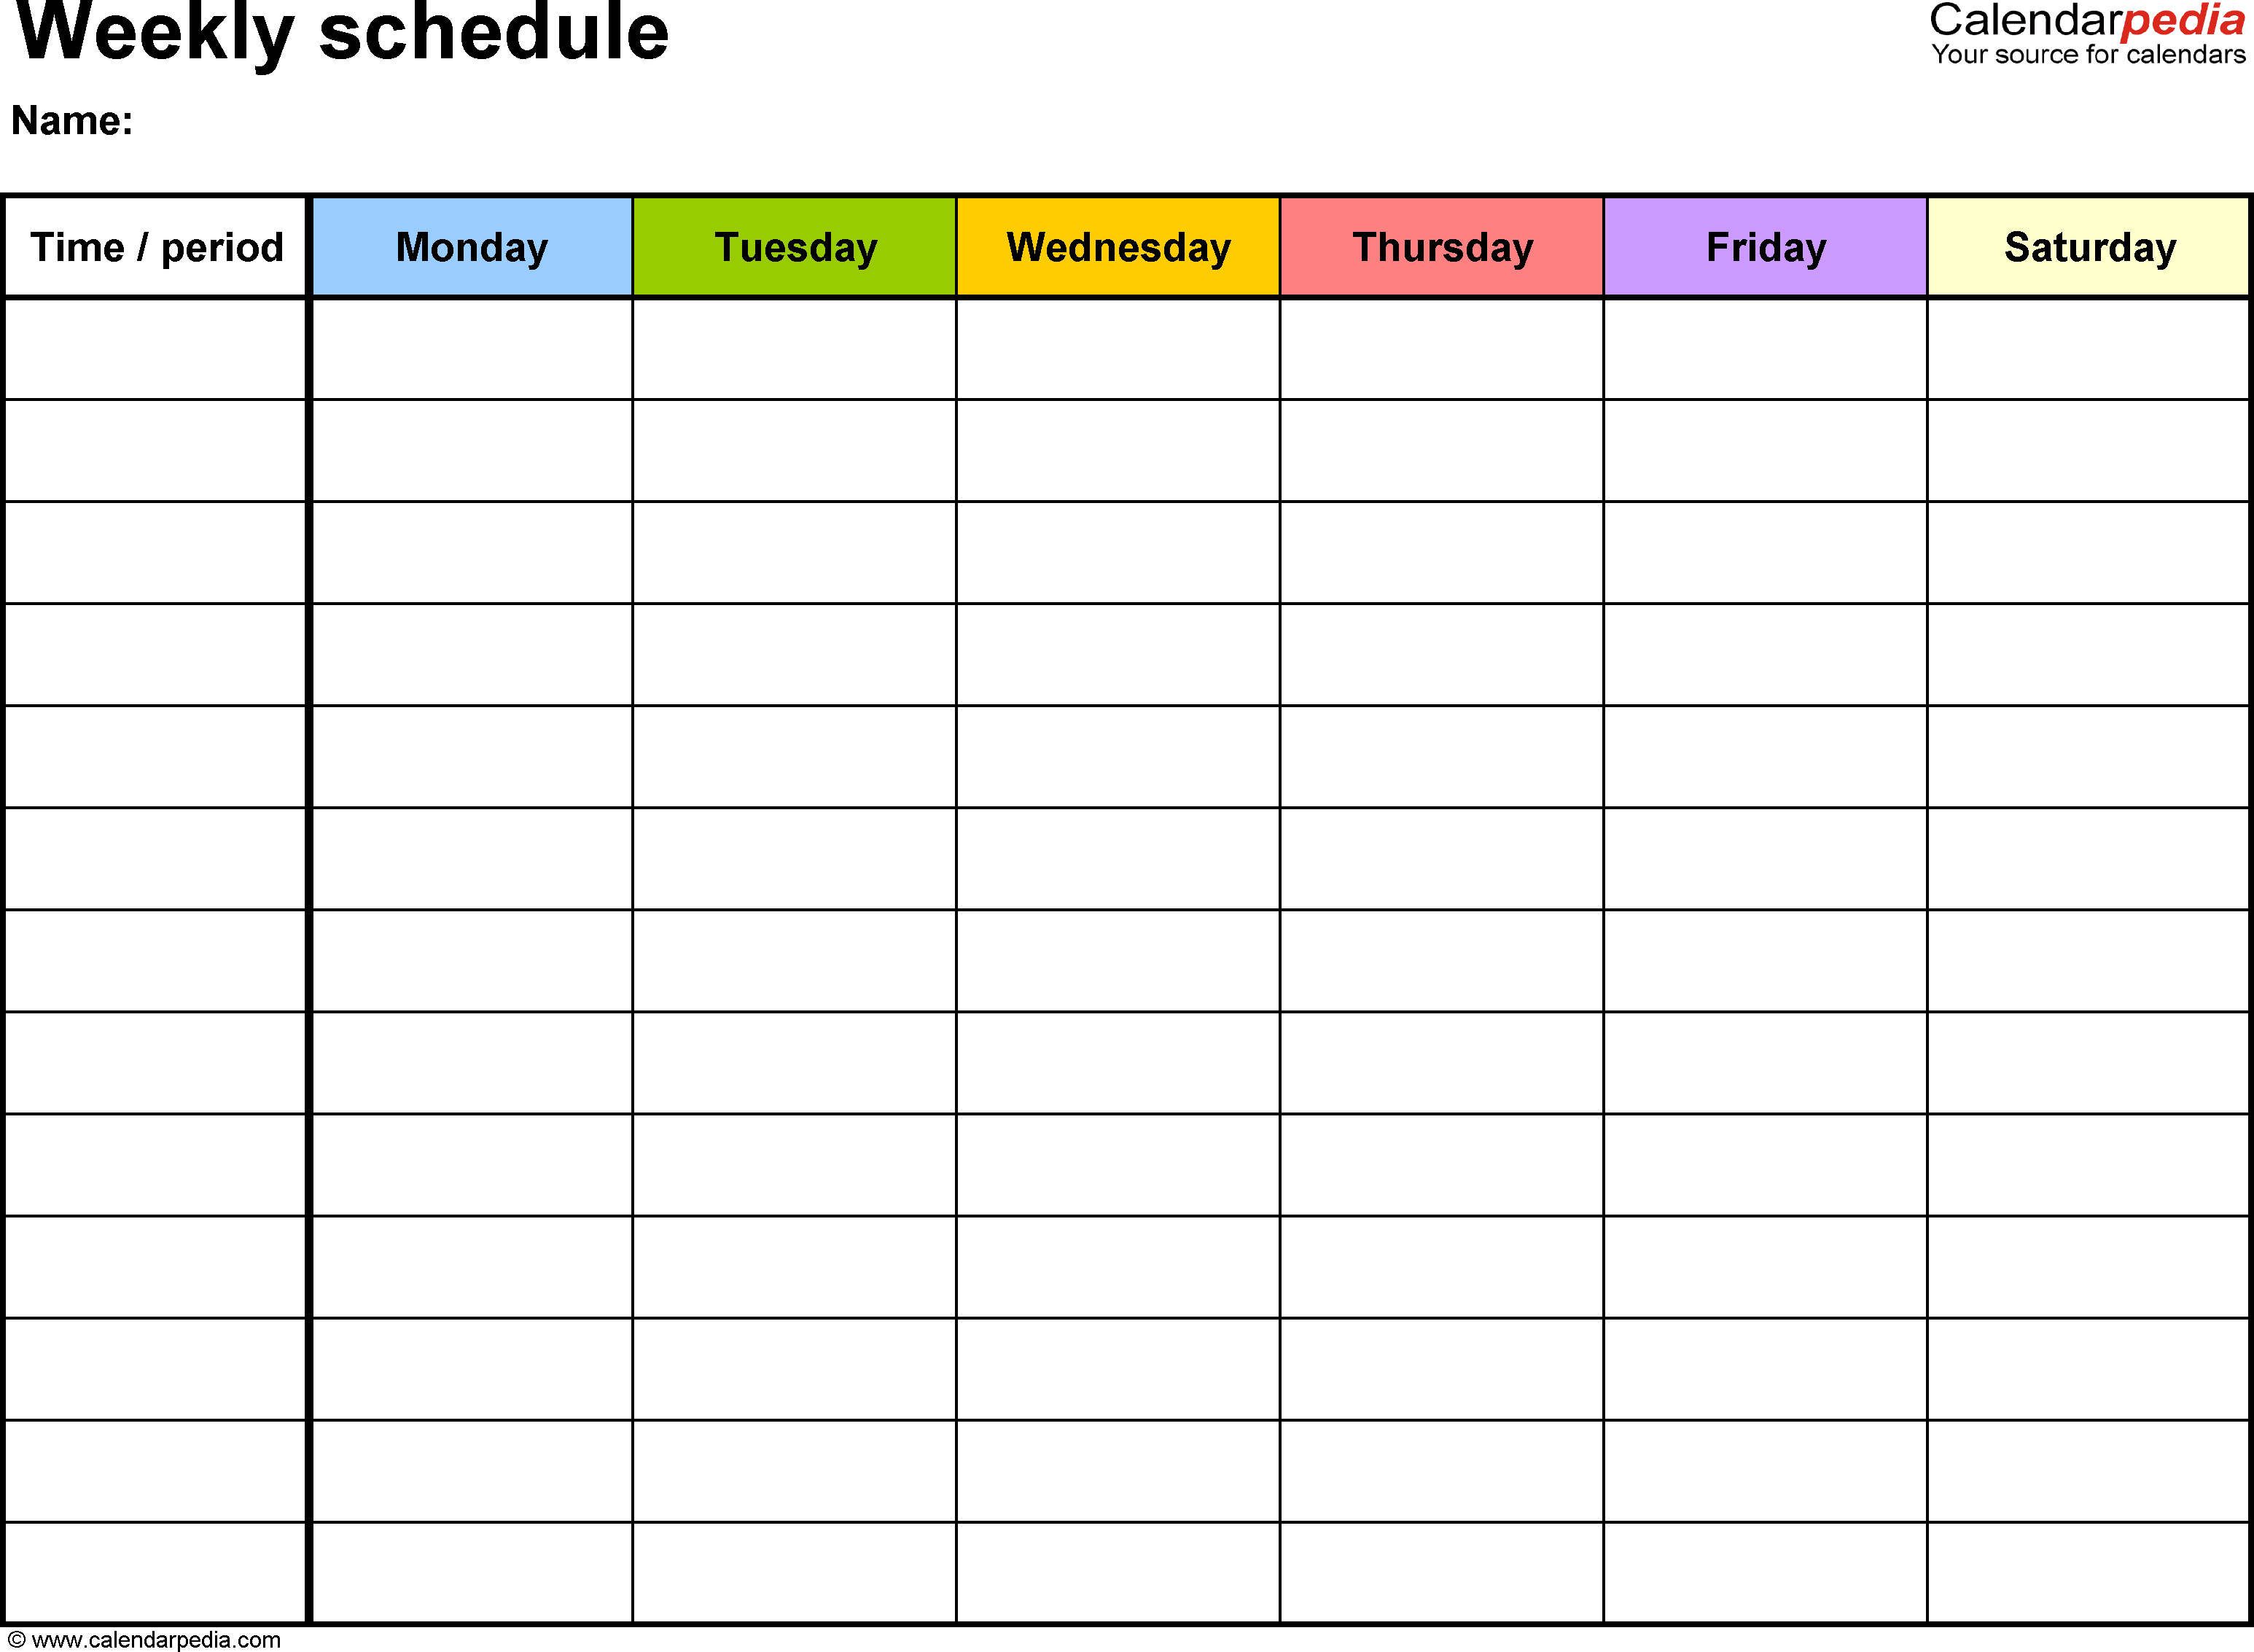 Free Weekly Schedule Templates For Word - 18 Templates - Free Printable Weekly Work Schedule